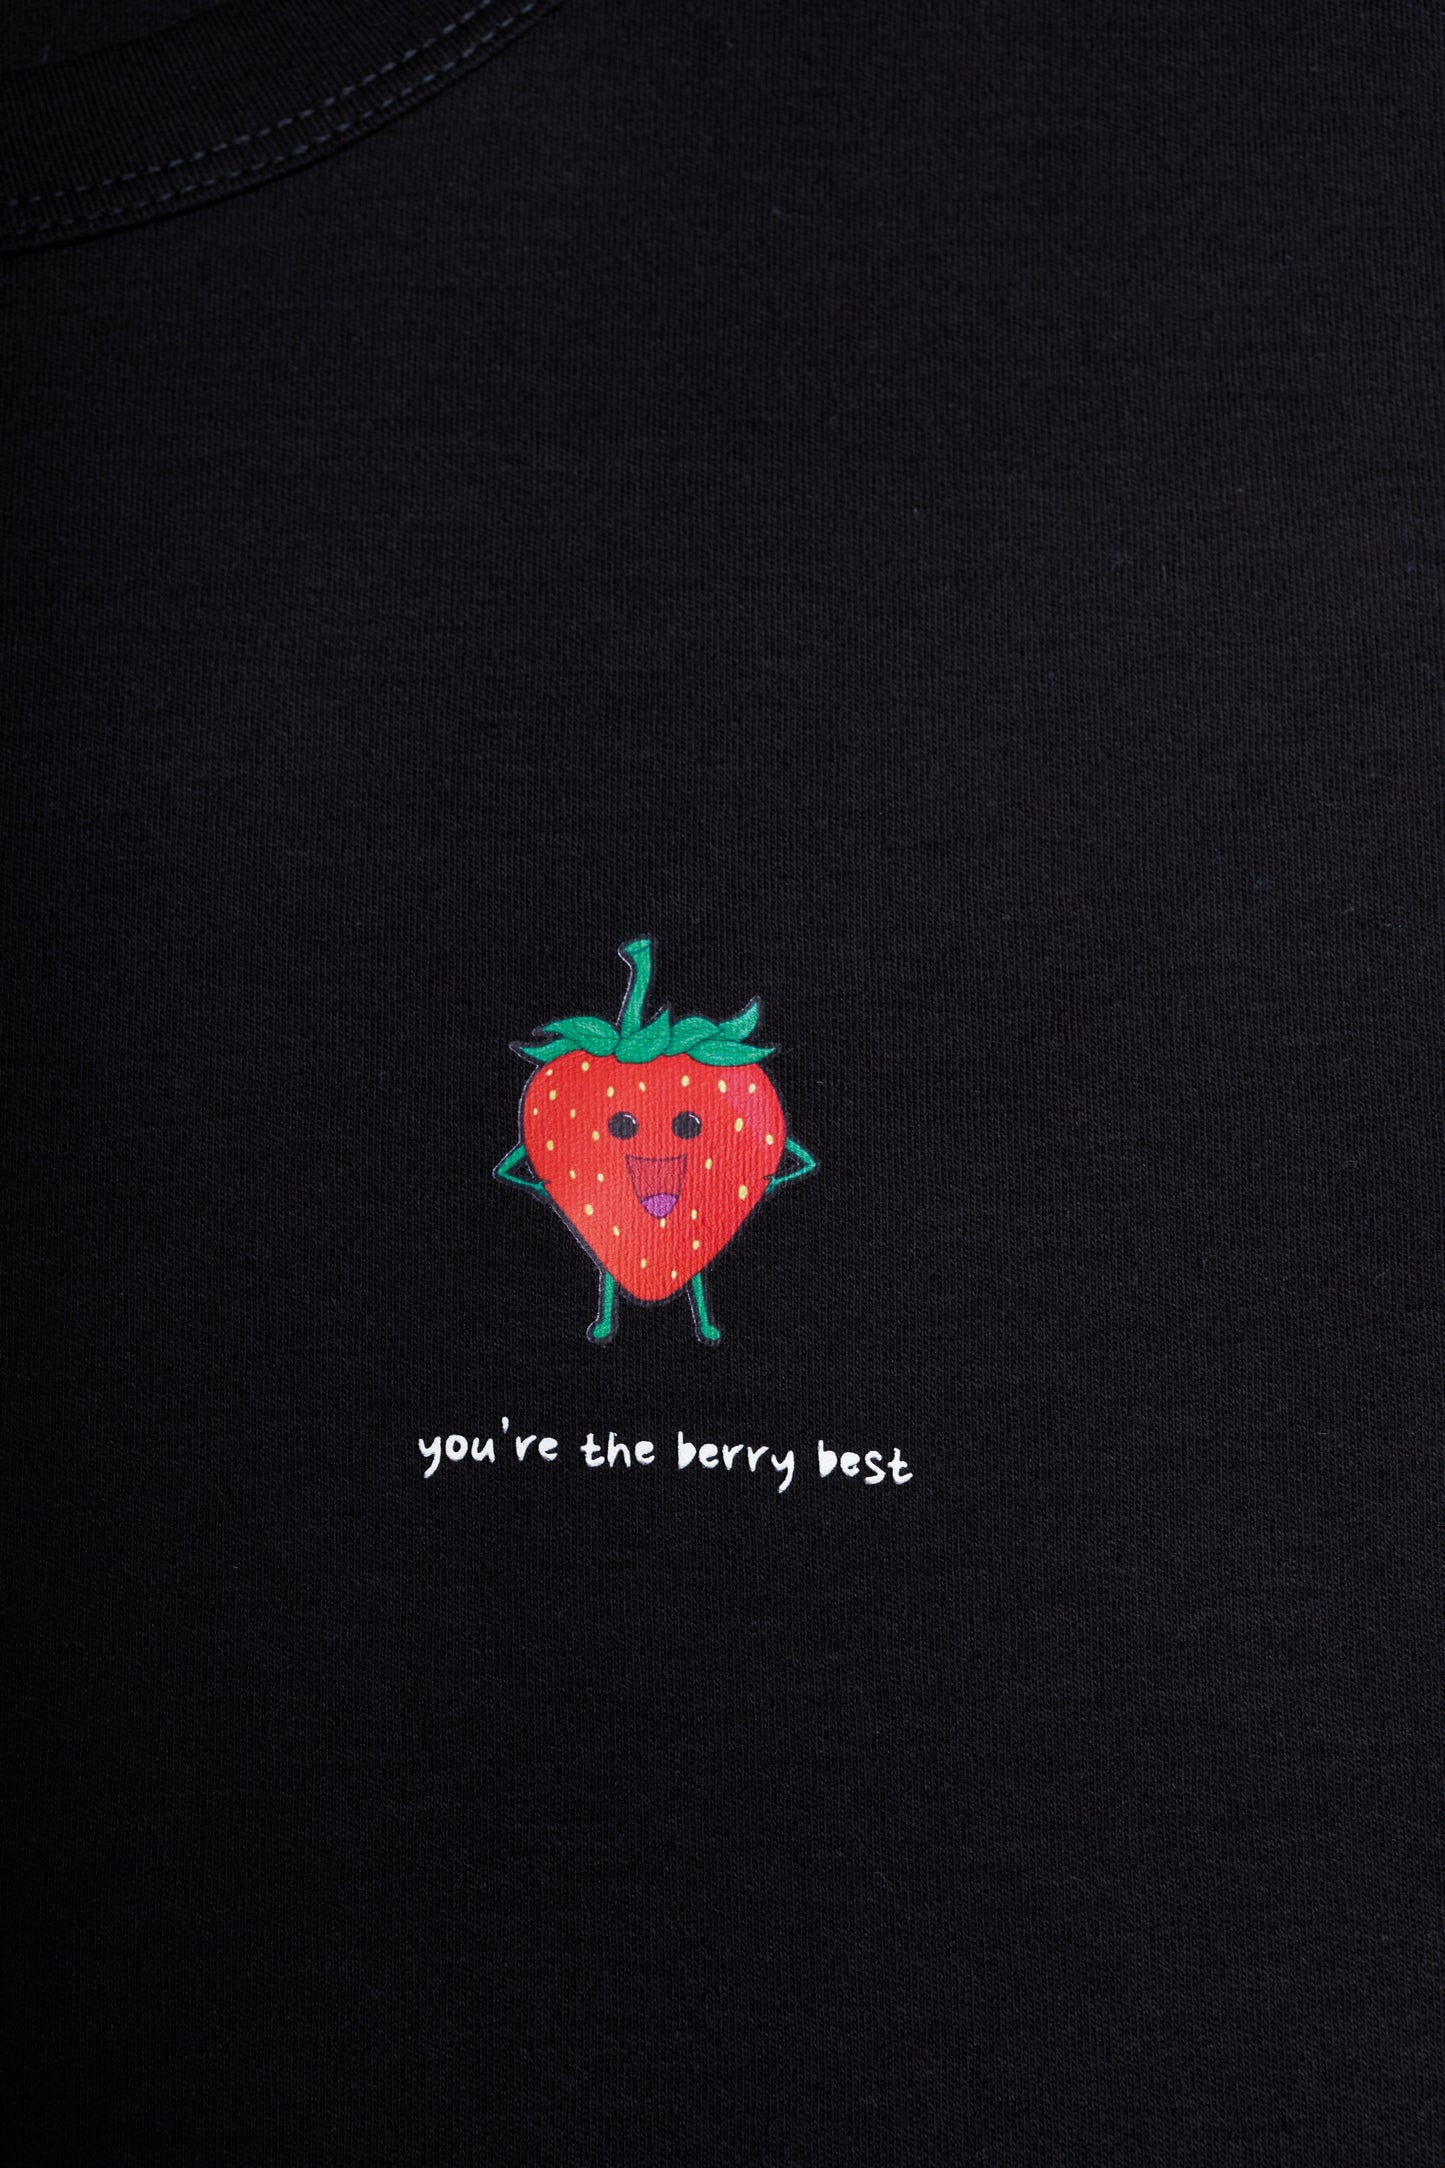 Women's "You're the Berry Best"